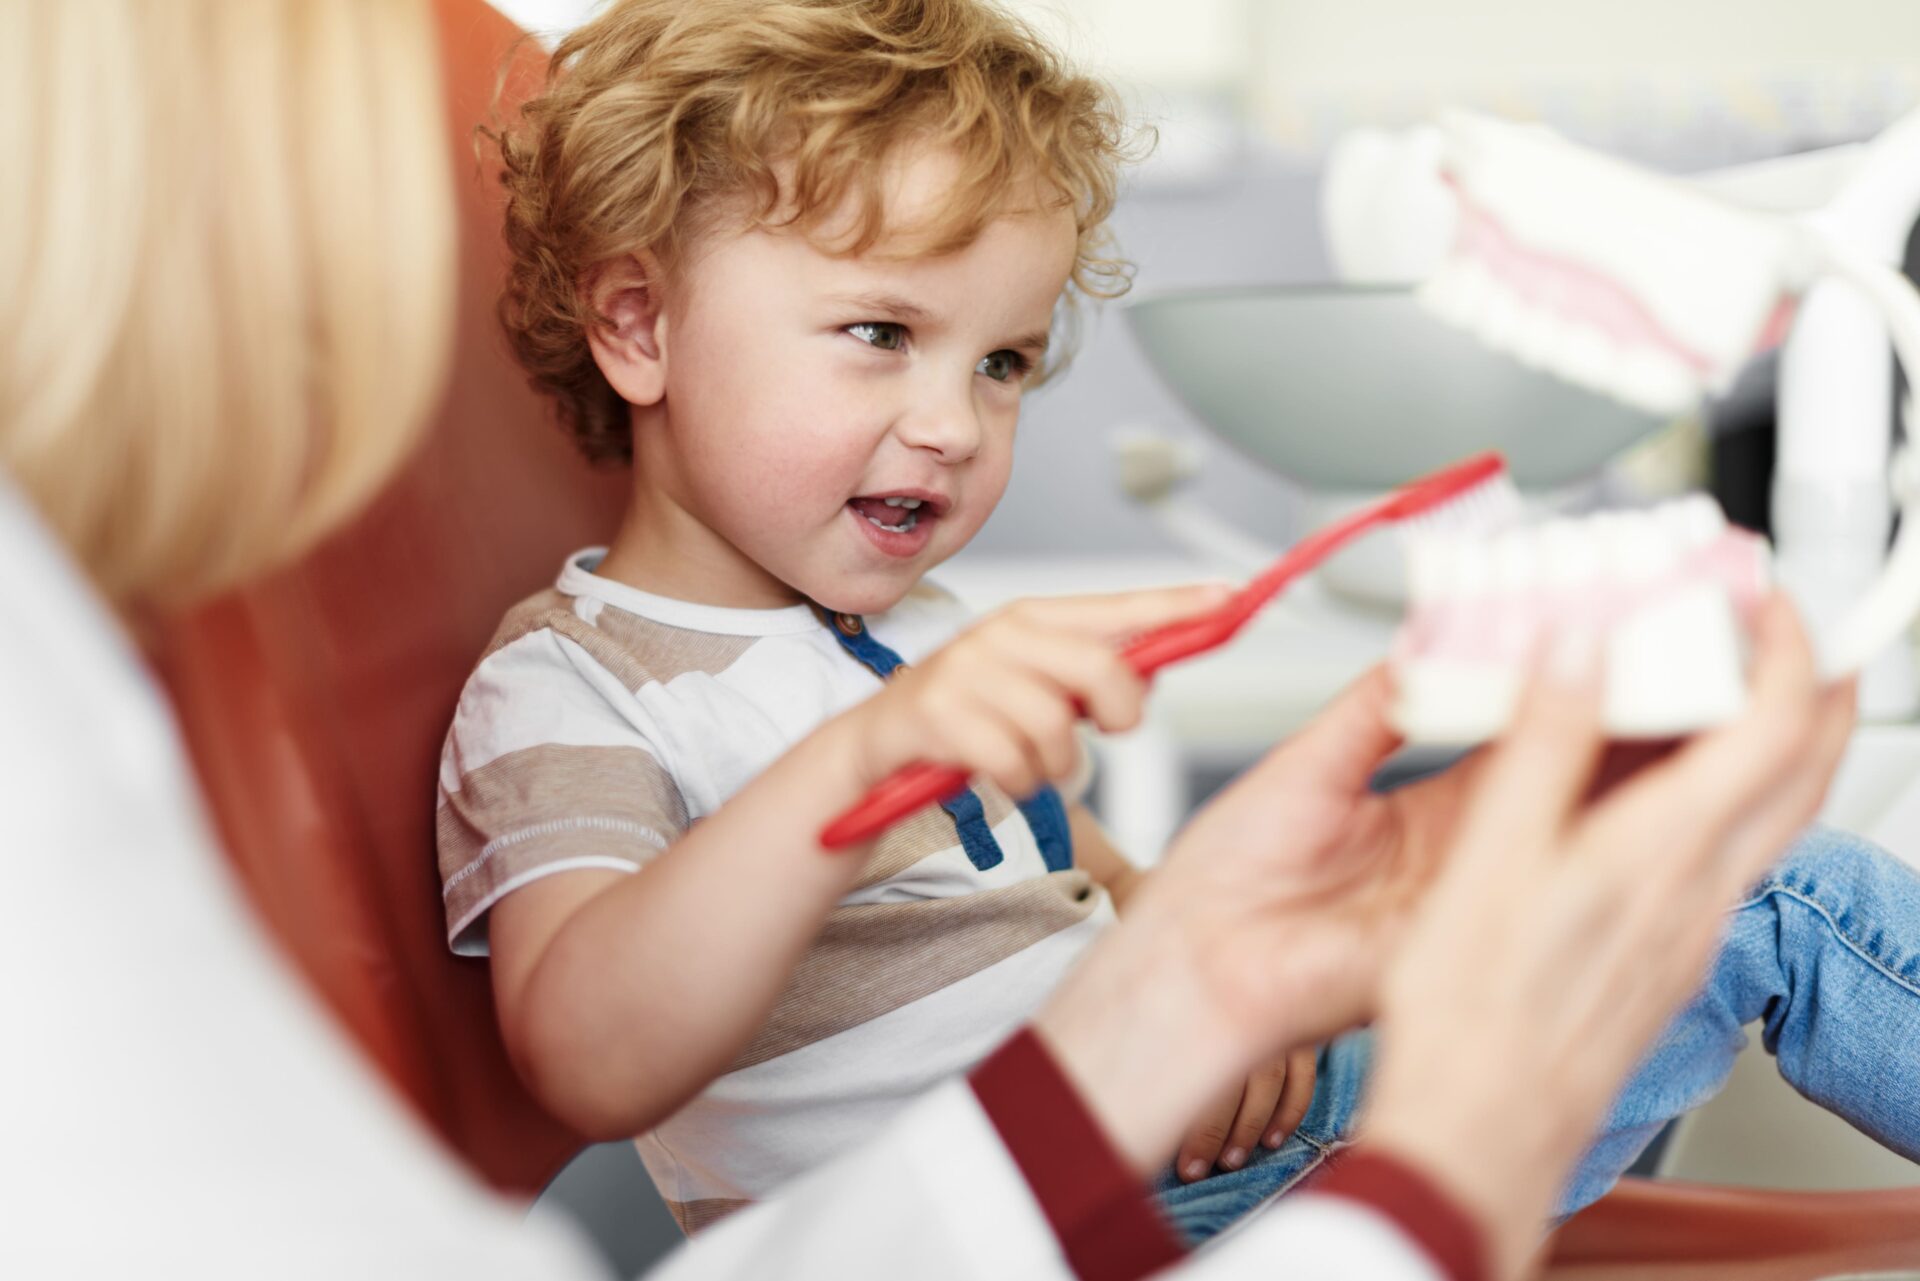 Why Should You Take Your Children to a Pediatric Dentist